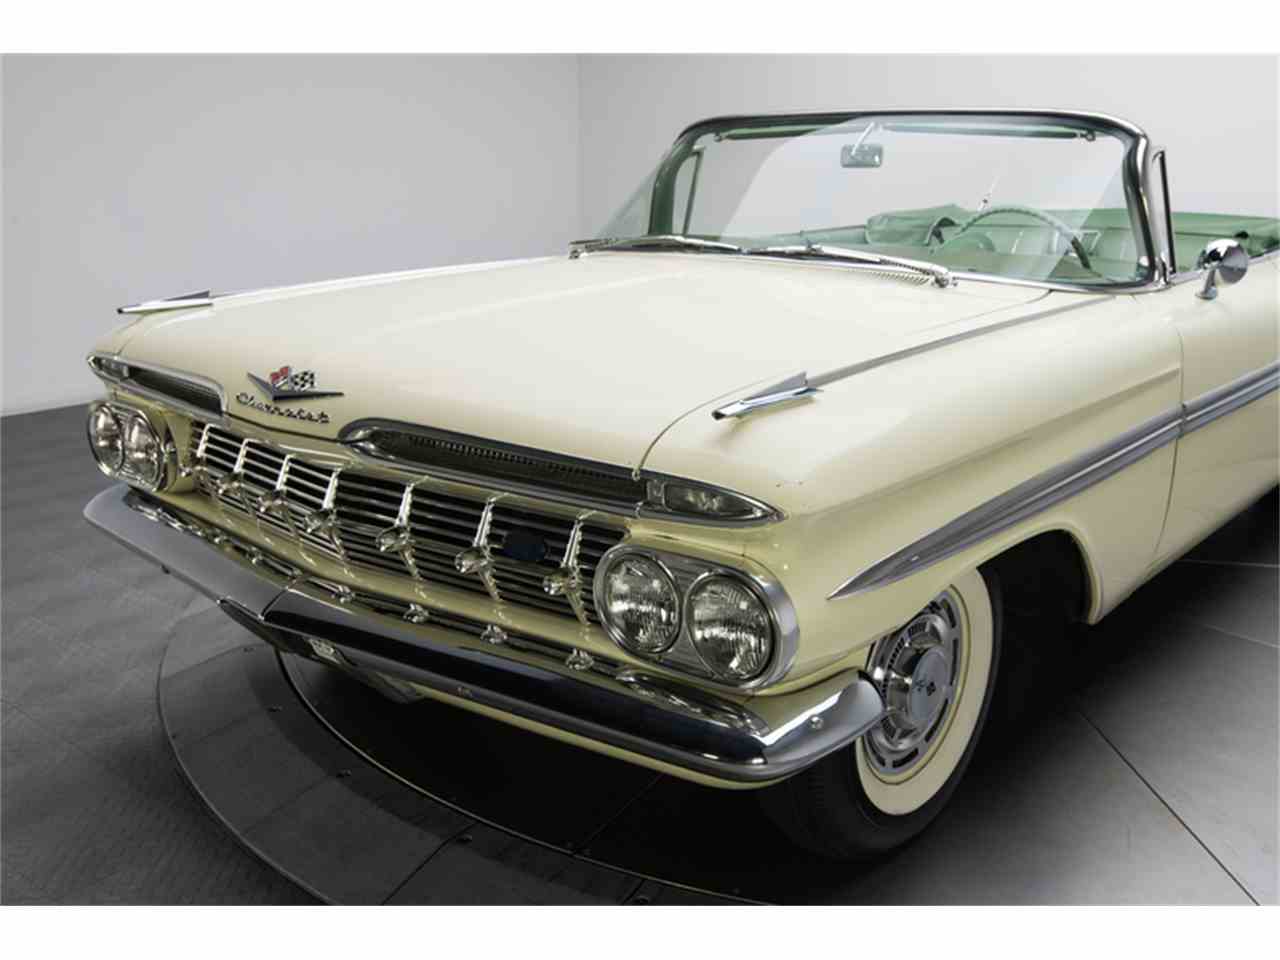 How much do 1959 Chevrolet Impalas typically sell for?